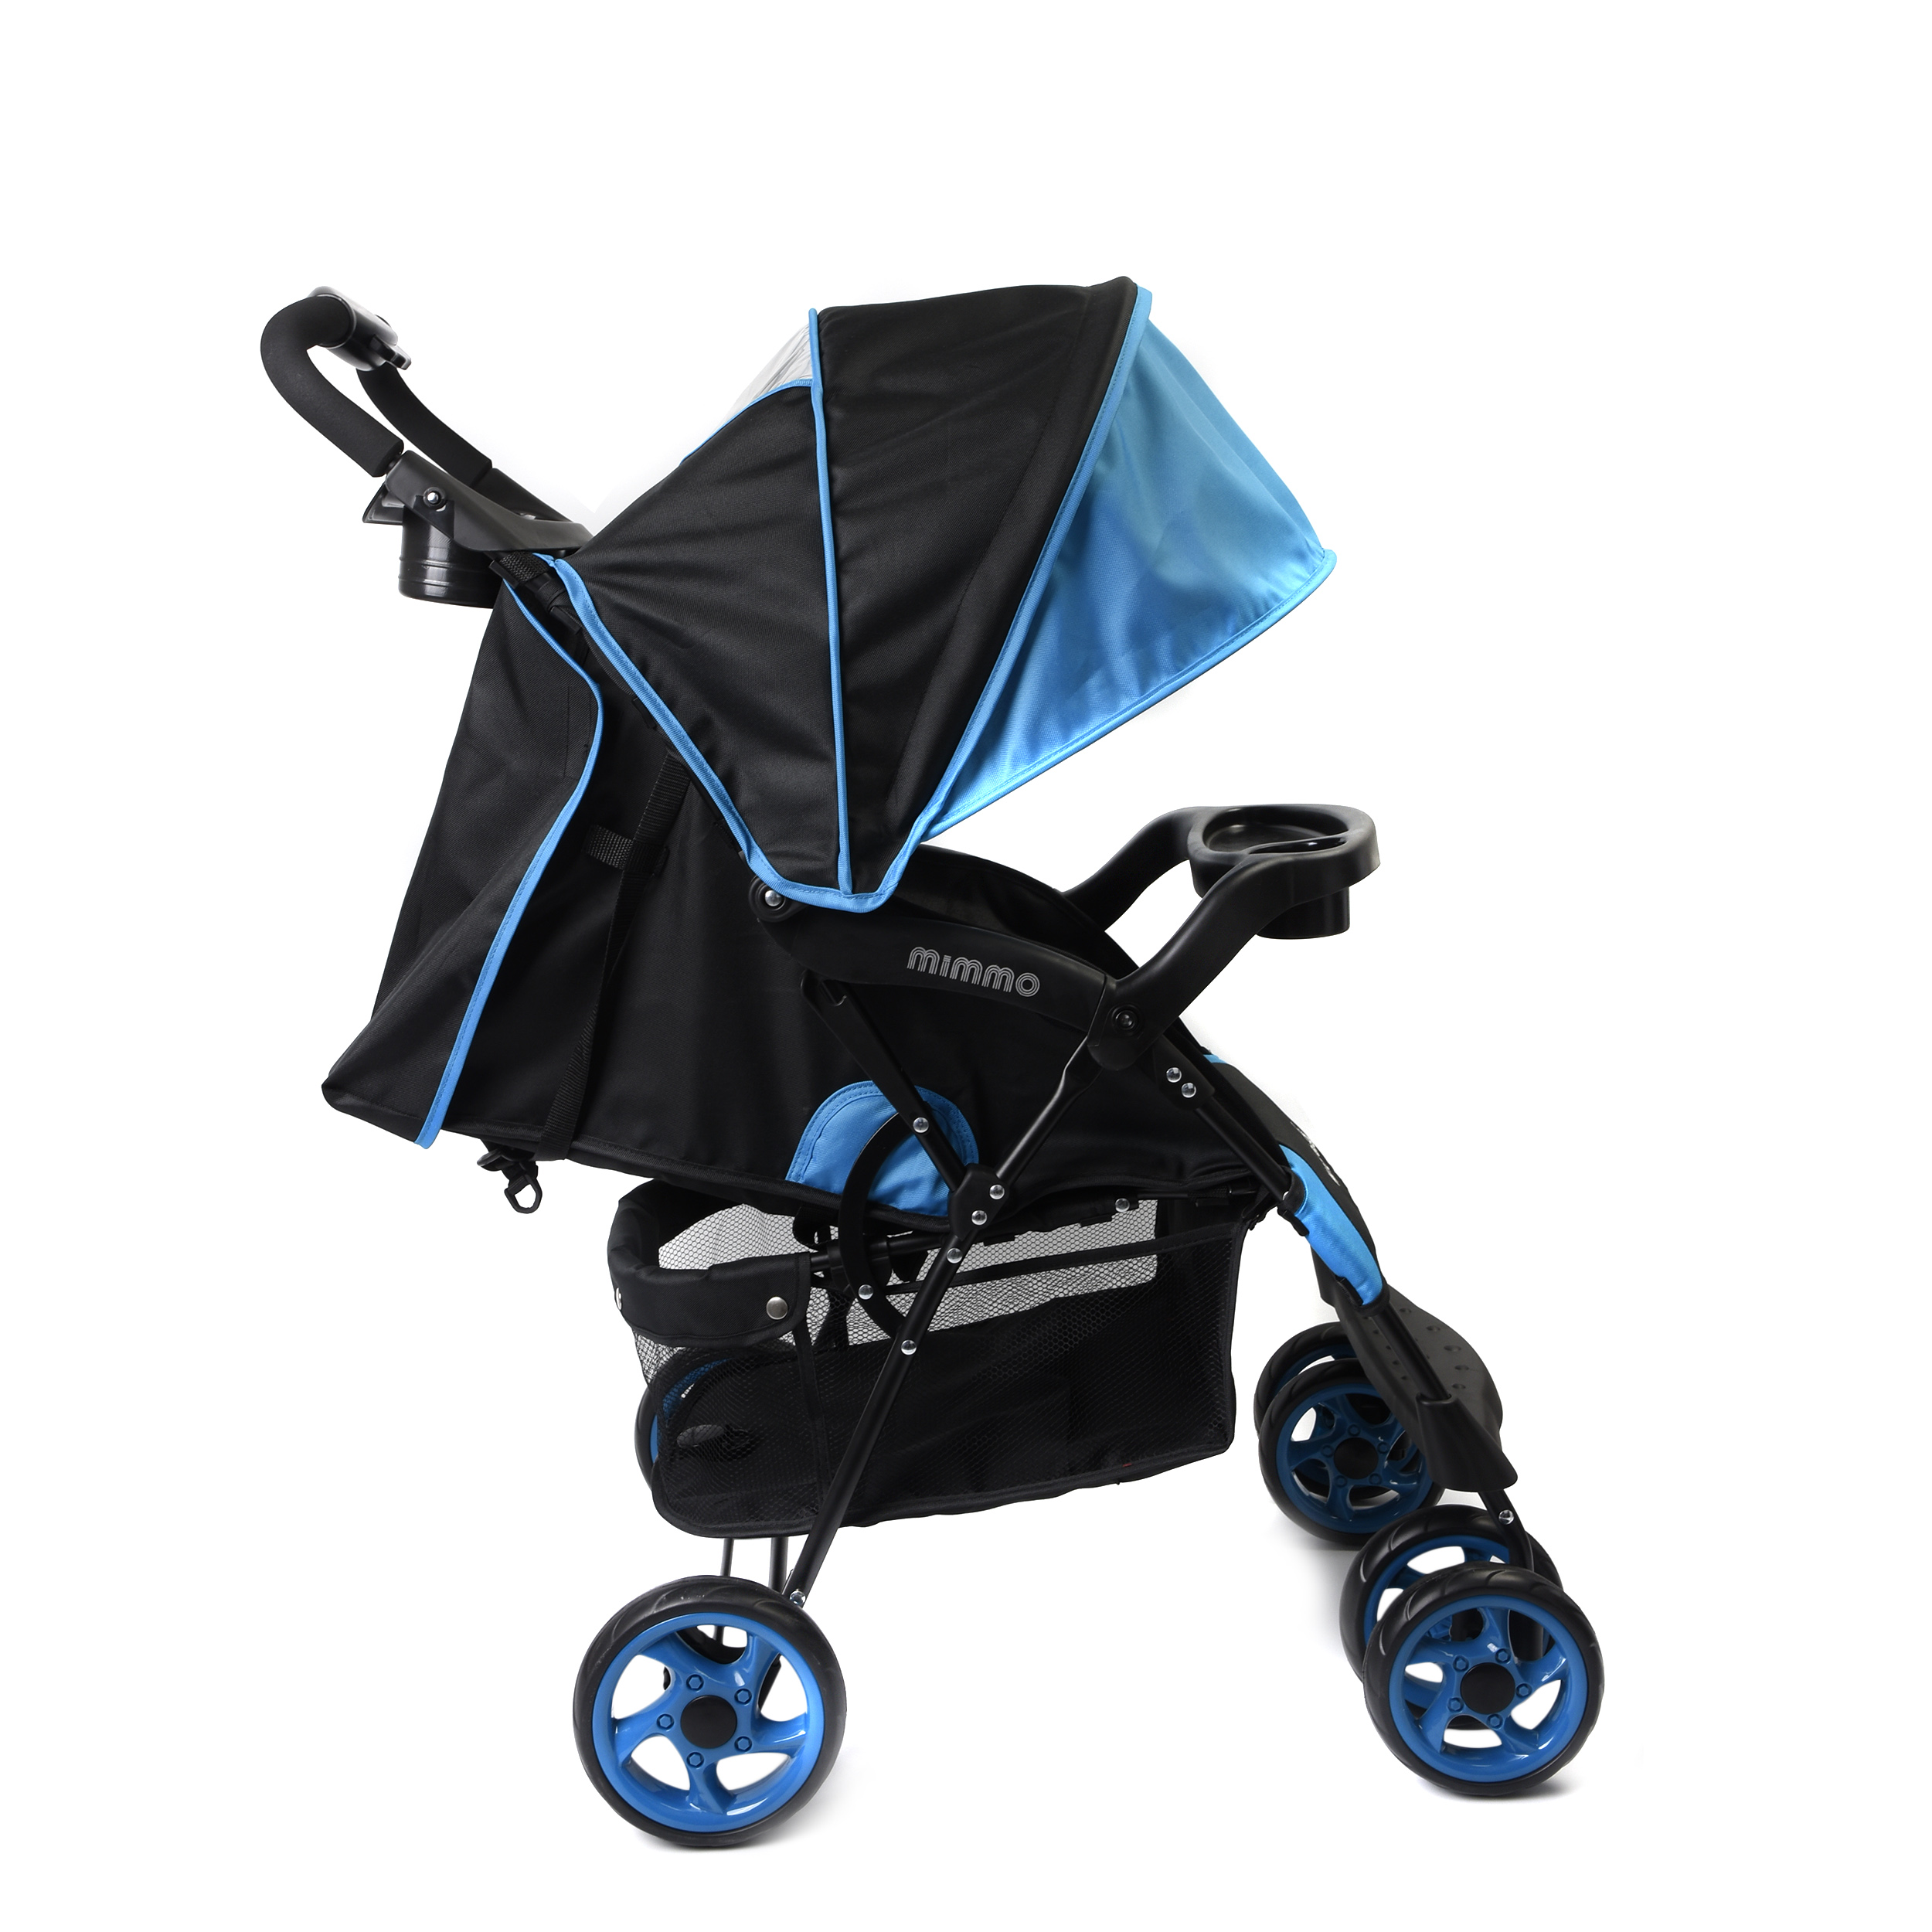 Wonder buggy Mimmo Deluxe Lightweight Stroller, Teal Blue - image 4 of 6